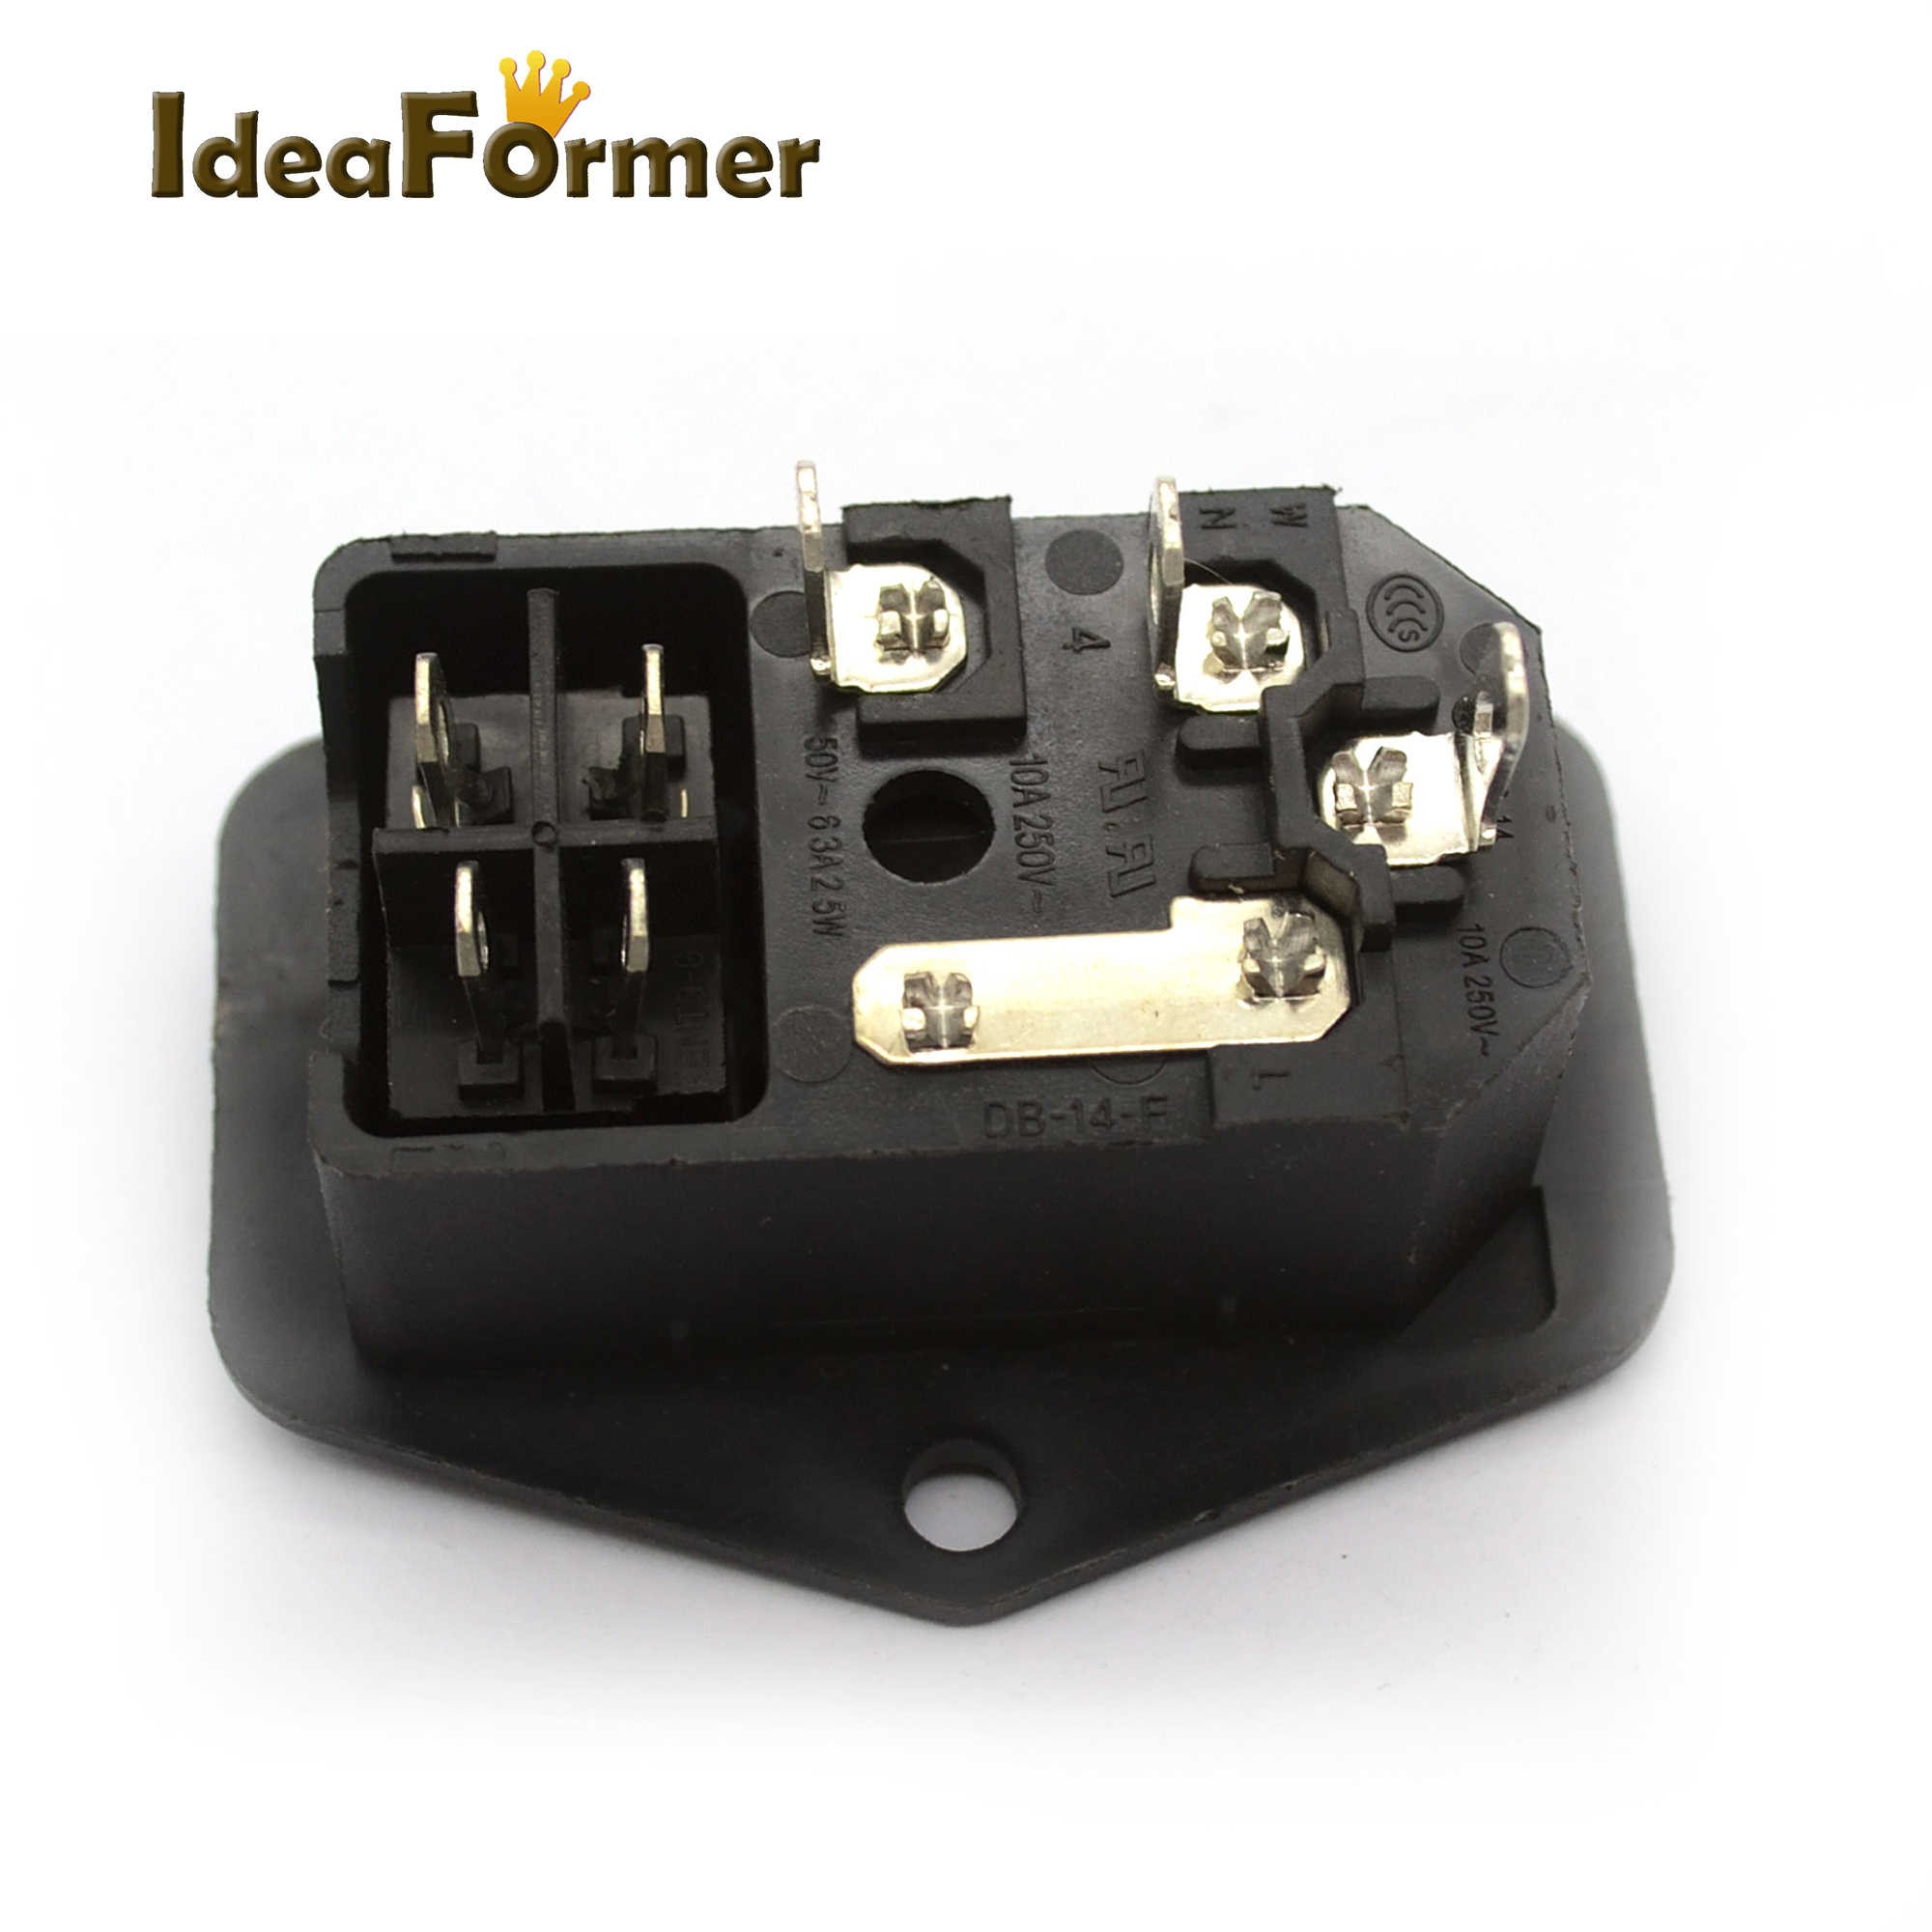 Iec 320 C14 Wiring 5pcs 10a 15a 250v Inlet Power Switch socket Iec320 C14 Switch Power 3 In 1 Ac Power socket with without Fuse 3d Printer Parts Of Iec 320 C14 Wiring